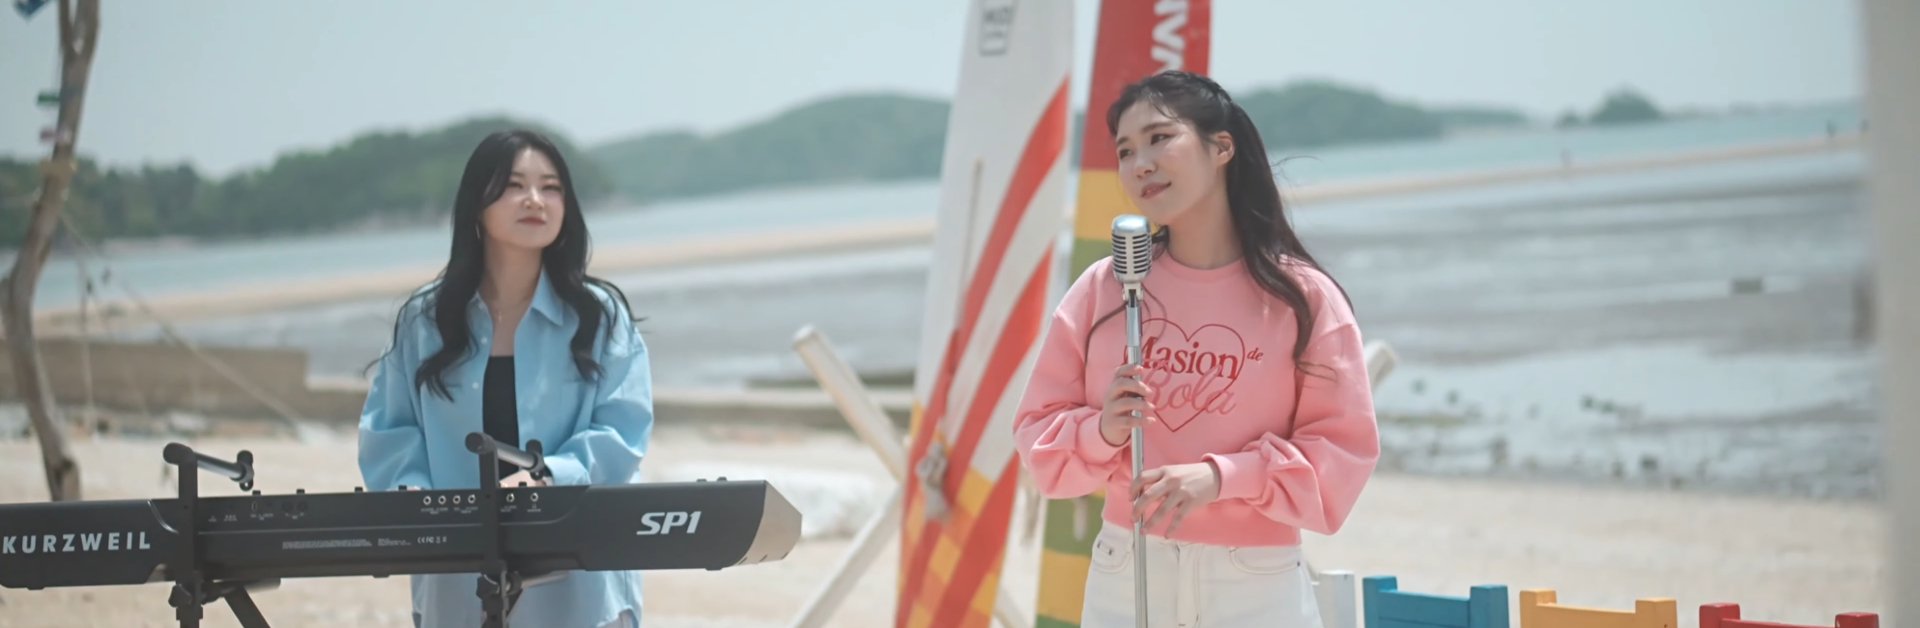 2 Korean women performing on a beach. One is playing a keyboard on the left, and the other standing in front of a microphone stand on the right